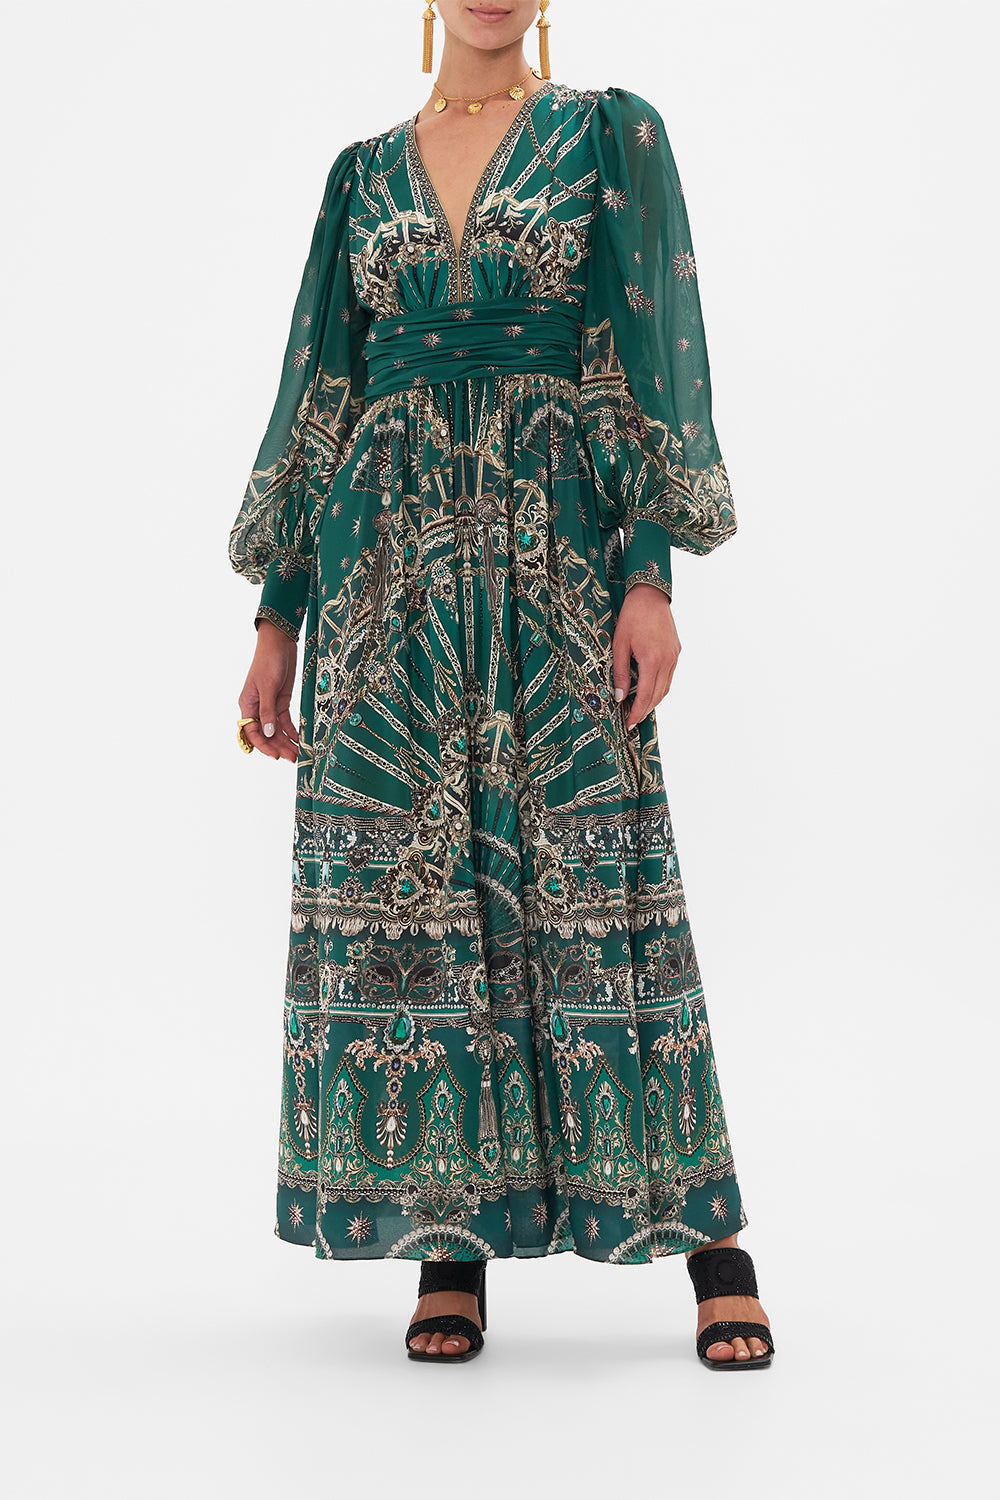 Front view of model wearing CAMILLA Long Silk Dress in A Venice Veil print